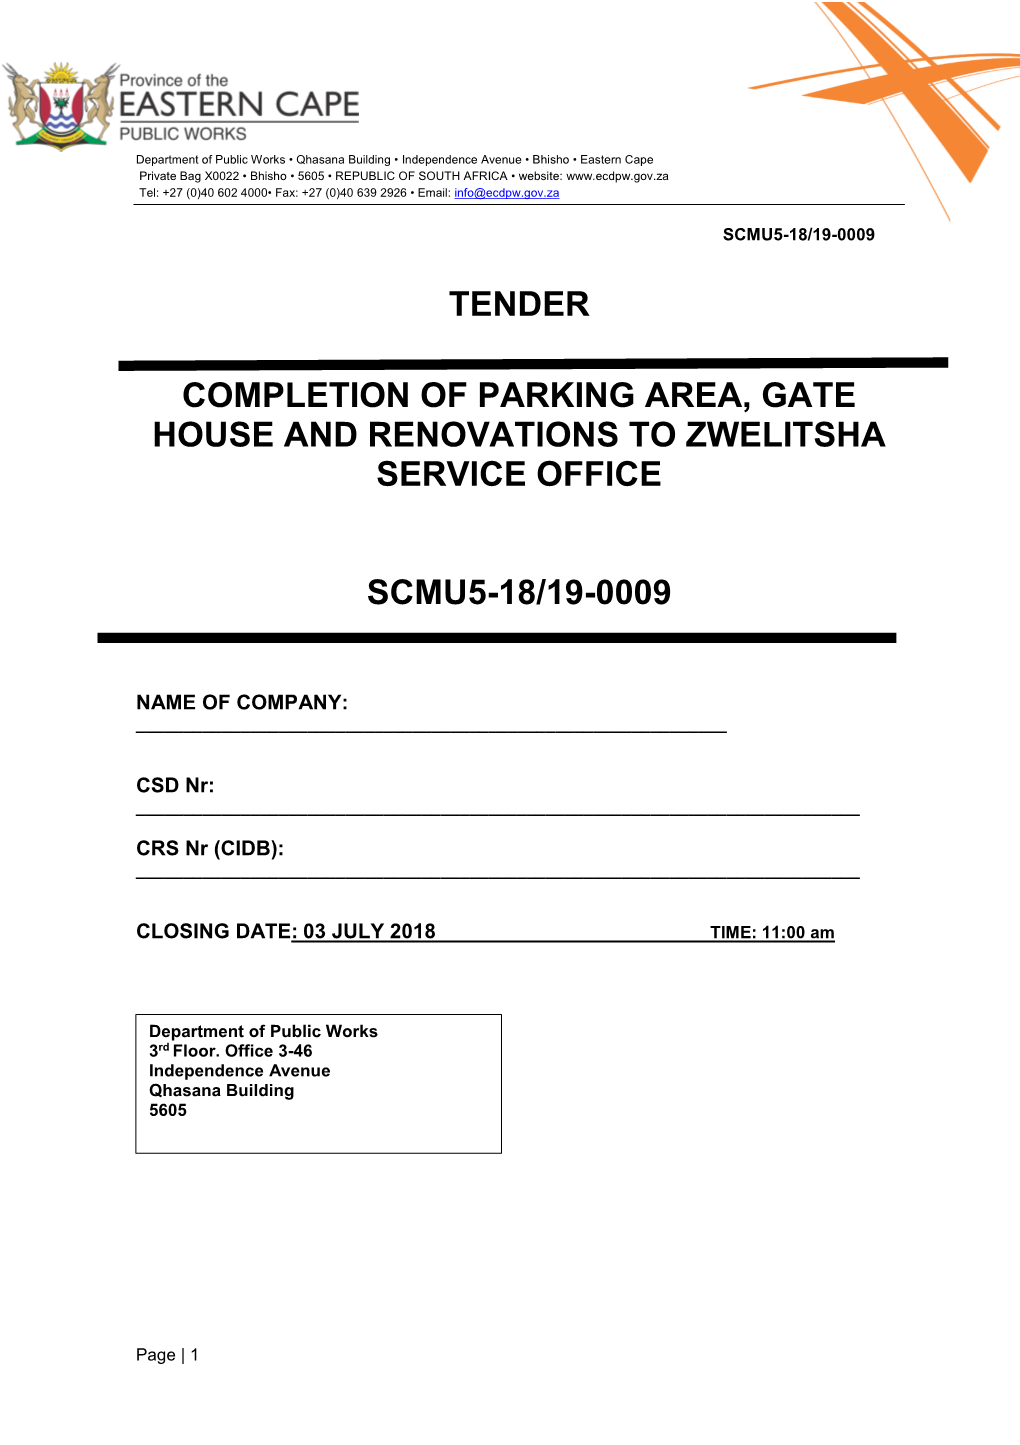 Tender Completion of Parking Area, Gate House And